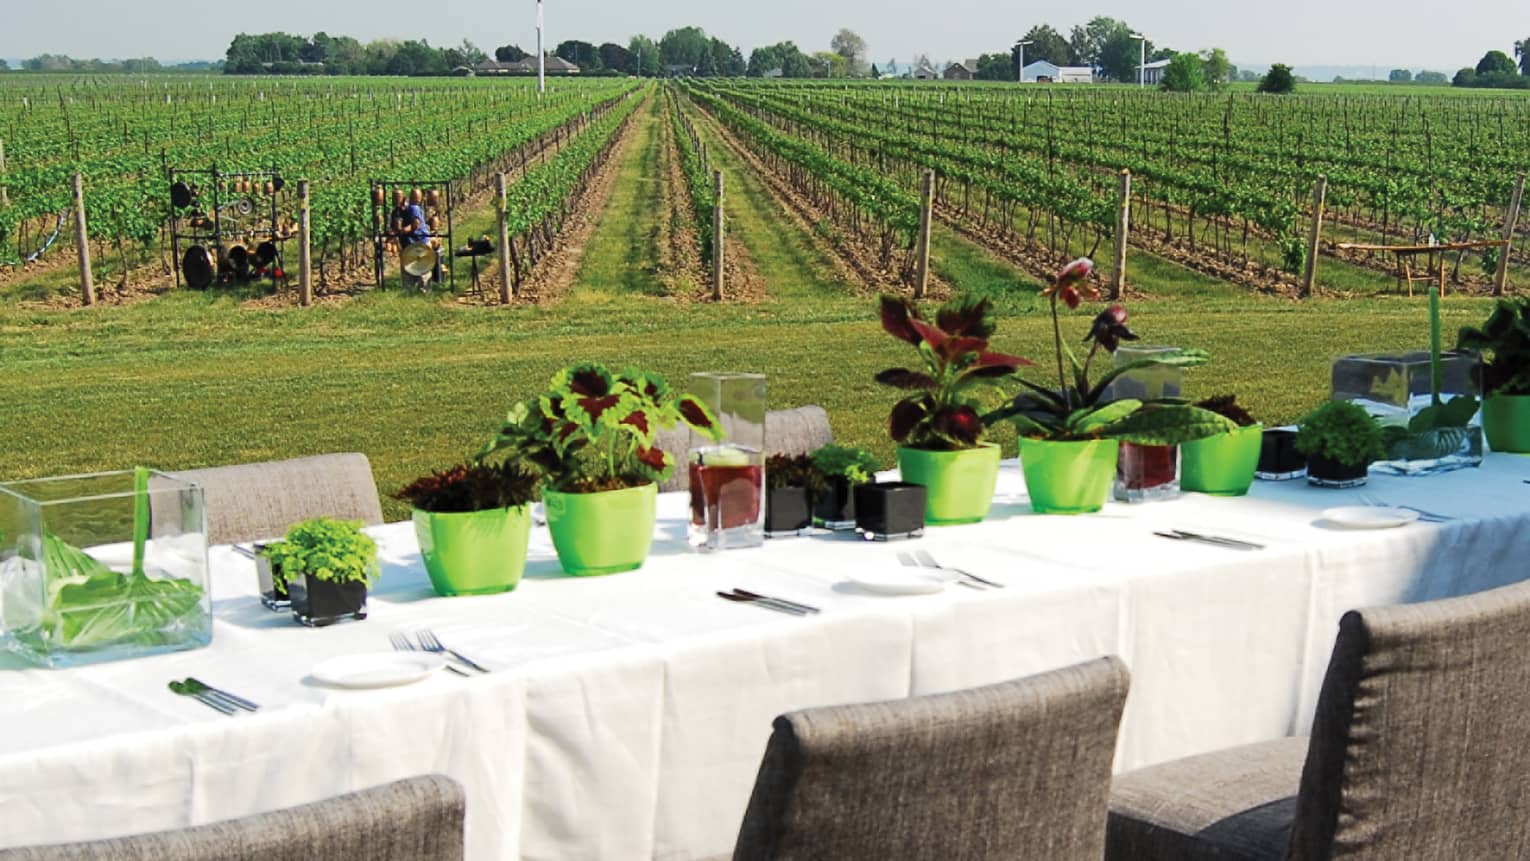 Long outdoor dining table in front of green vineyards in Niagara 